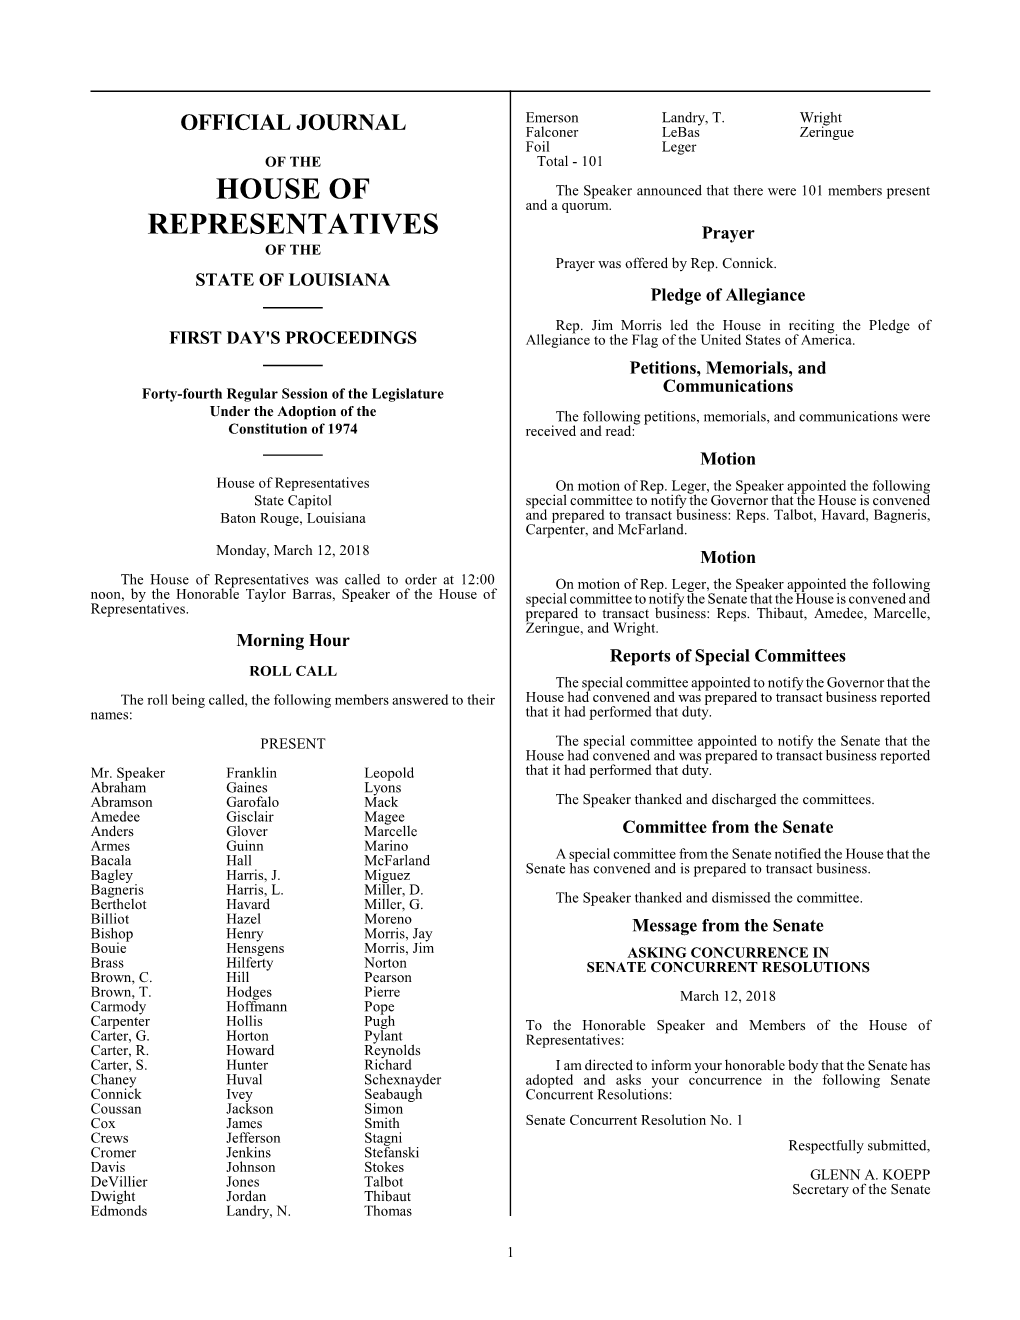 House of Representatives on Motion of Rep